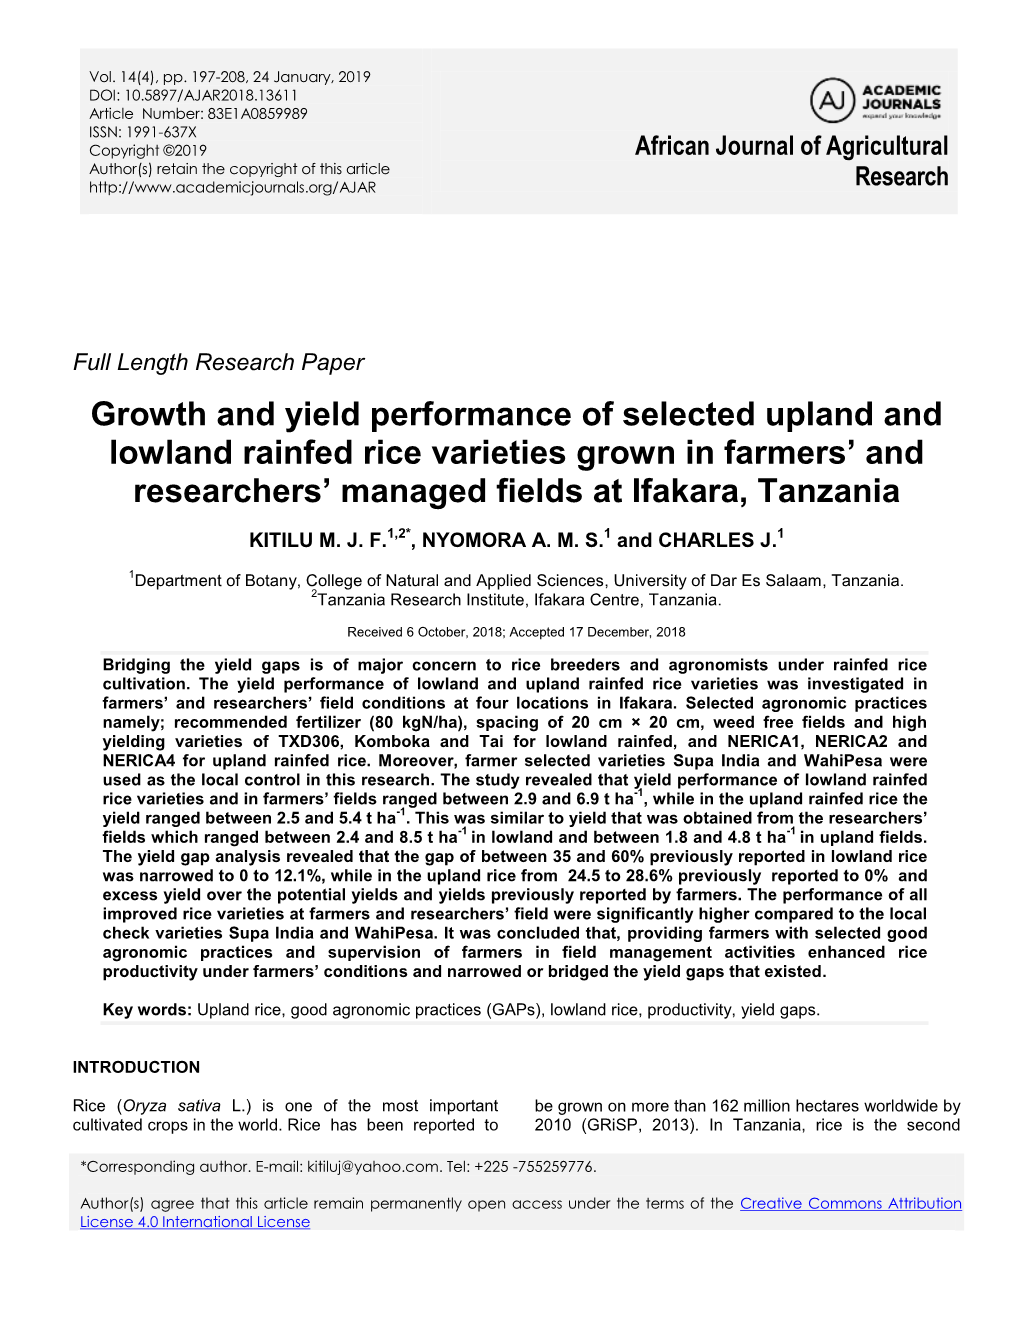 Growth and Yield Performance of Selected Upland and Lowland Rainfed Rice Varieties Grown in Farmers’ and Researchers’ Managed Fields at Ifakara, Tanzania